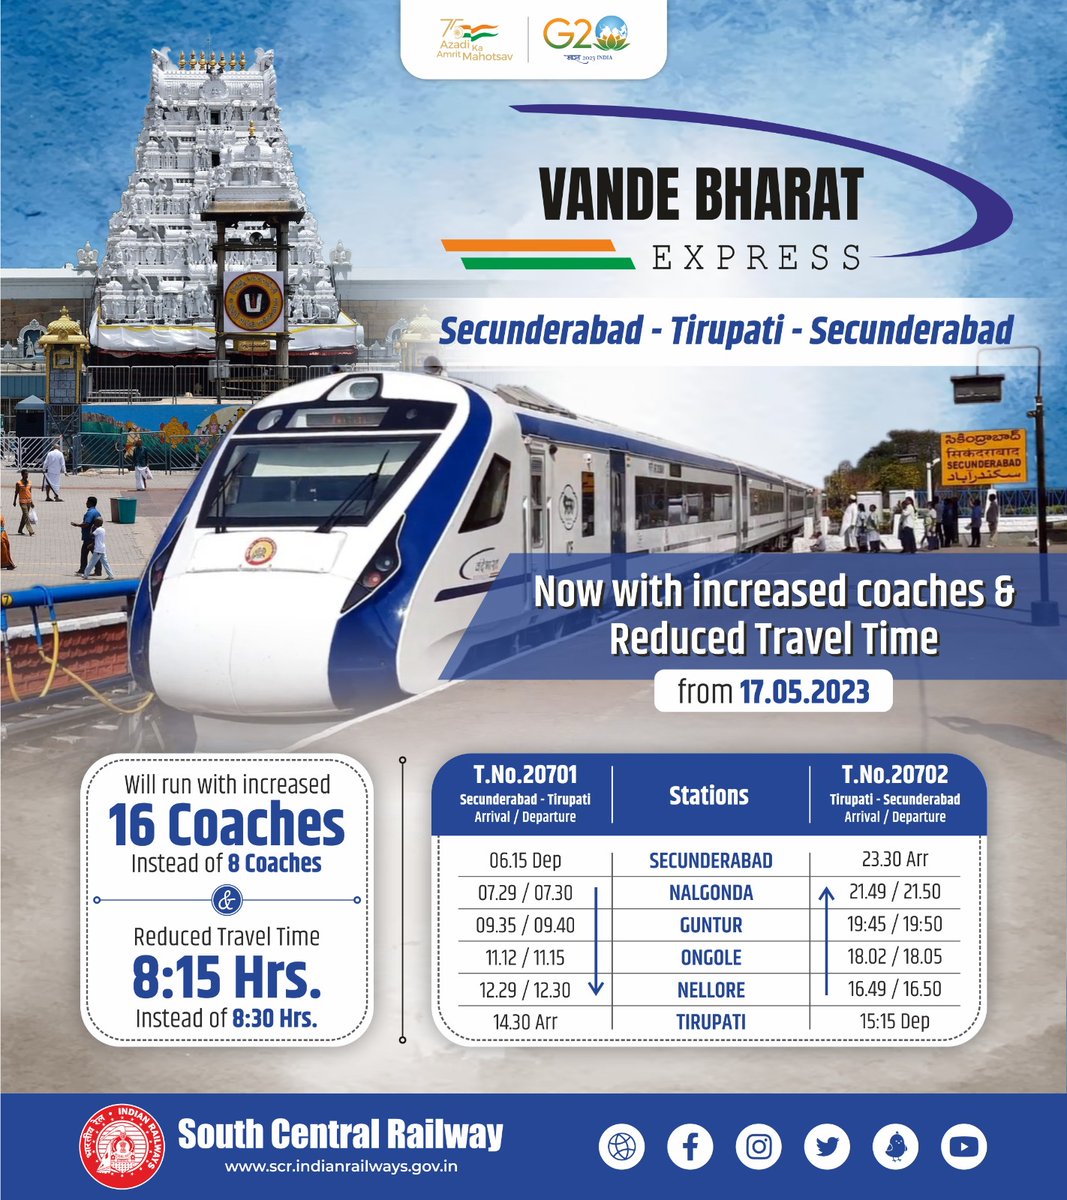 #Secunderabad - #Tirupati - Secunderabad Vande Bharat Train becomes faster and to operate with higher capacity w.e.f 17 May 2023 👉 16 Coaches instead of 8 👉 Travel time reduced by 15 mins in each direction #VandeBharat @PMOIndia @narendramodi @RailMinIndia @AshwiniVaishnaw